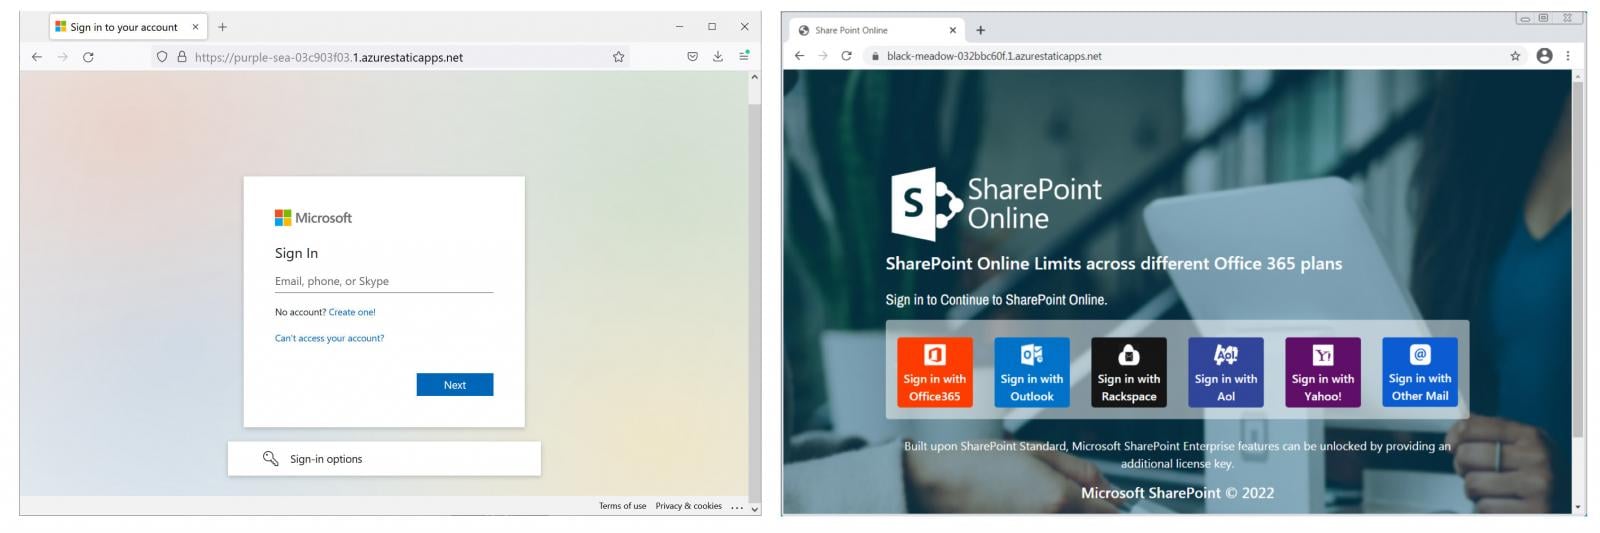 Azure Static Web Apps phishing pages